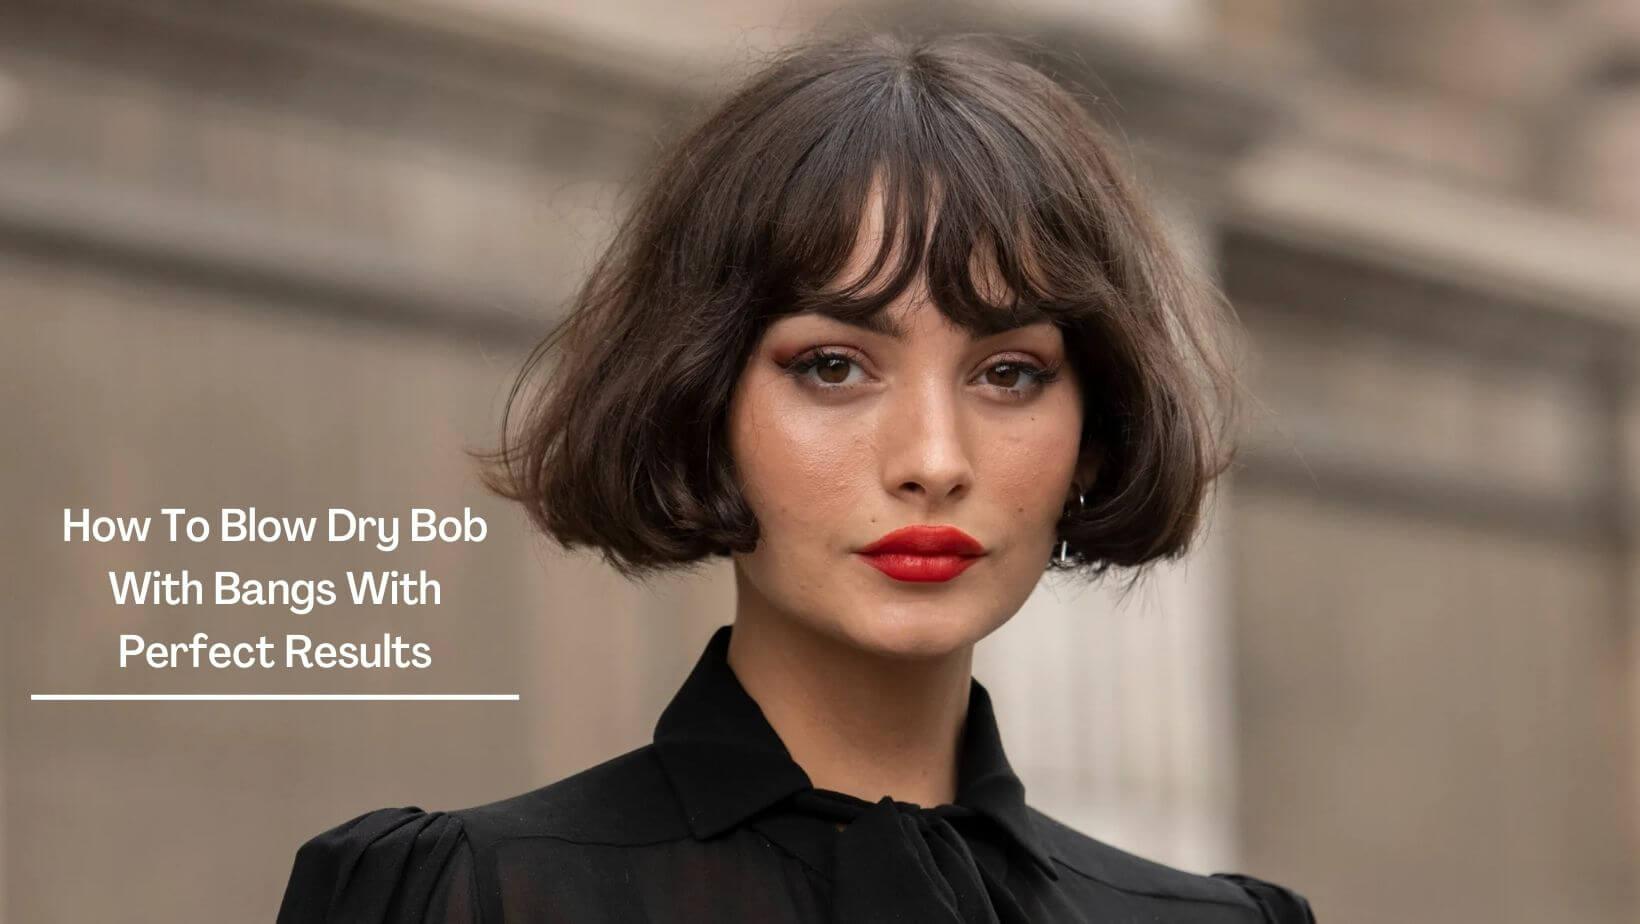 How To Blow Dry Bob With Bangs